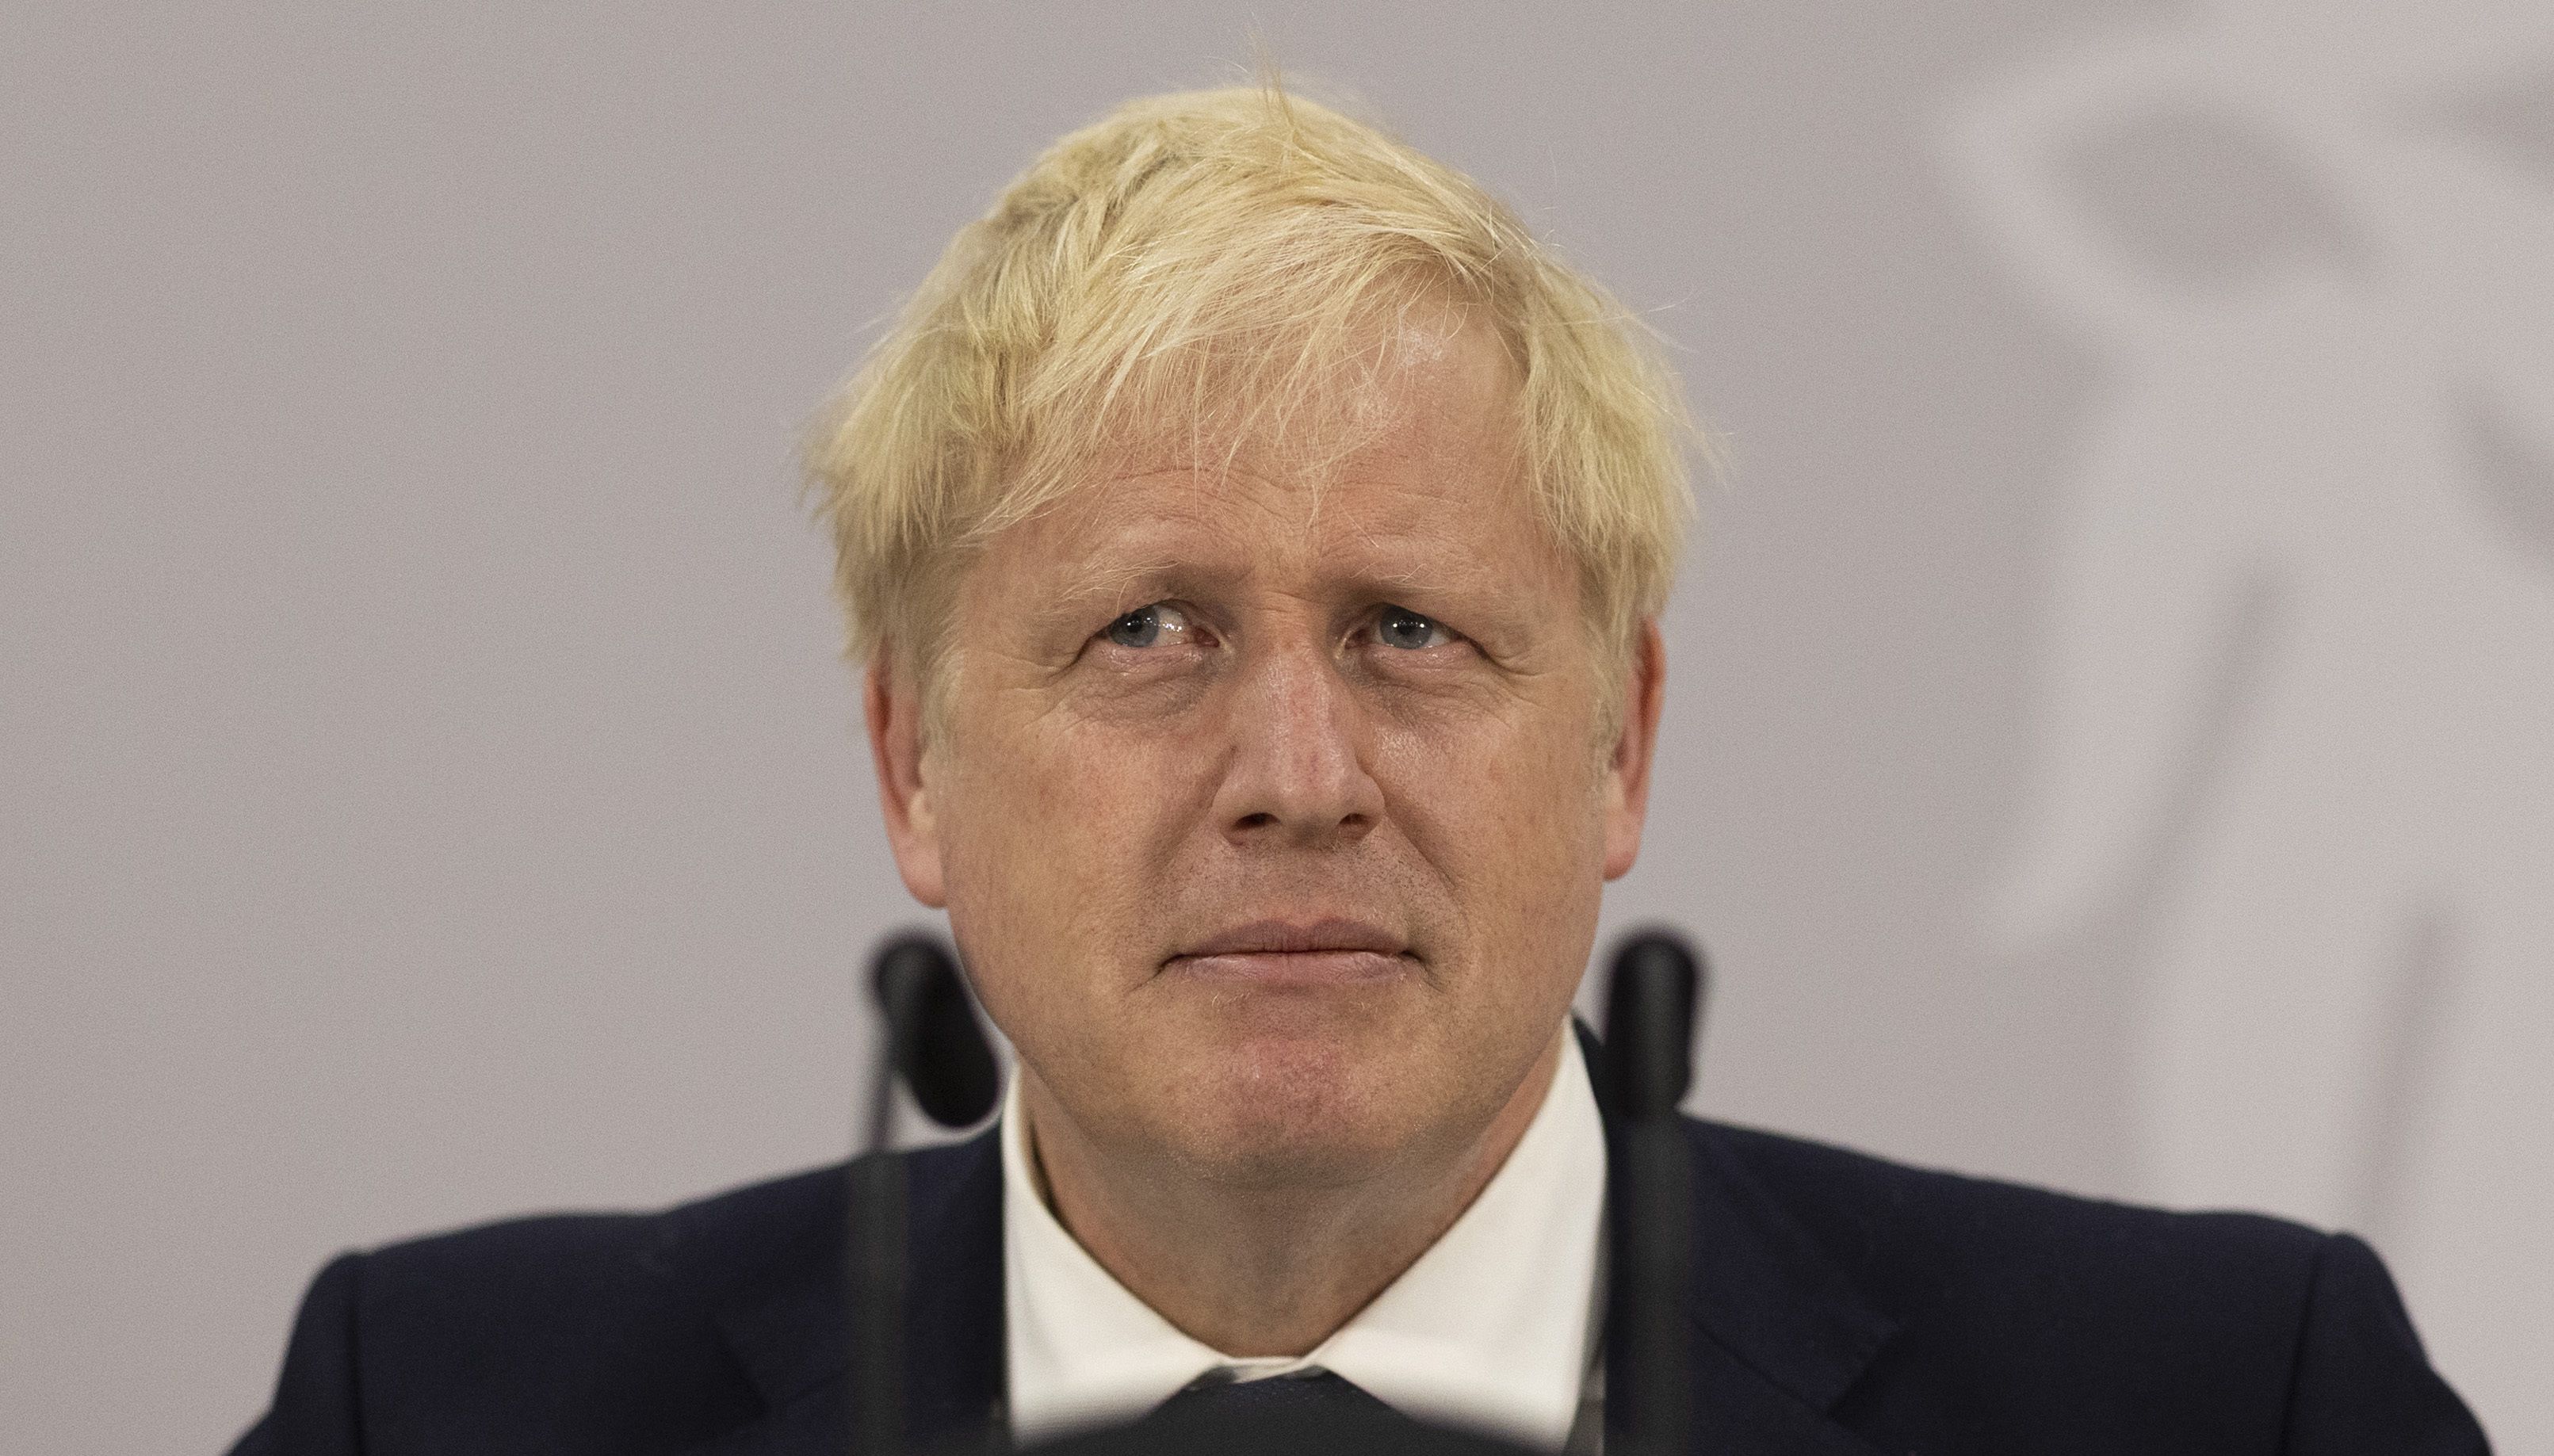 Prime Minister Boris Johnson speaks at a press conference during the Commonwealth Heads of Government Meeting (CHOGM) at the Lemigo Hotel, Kigali, Rwanda. Picture date: Friday June 24, 2022.